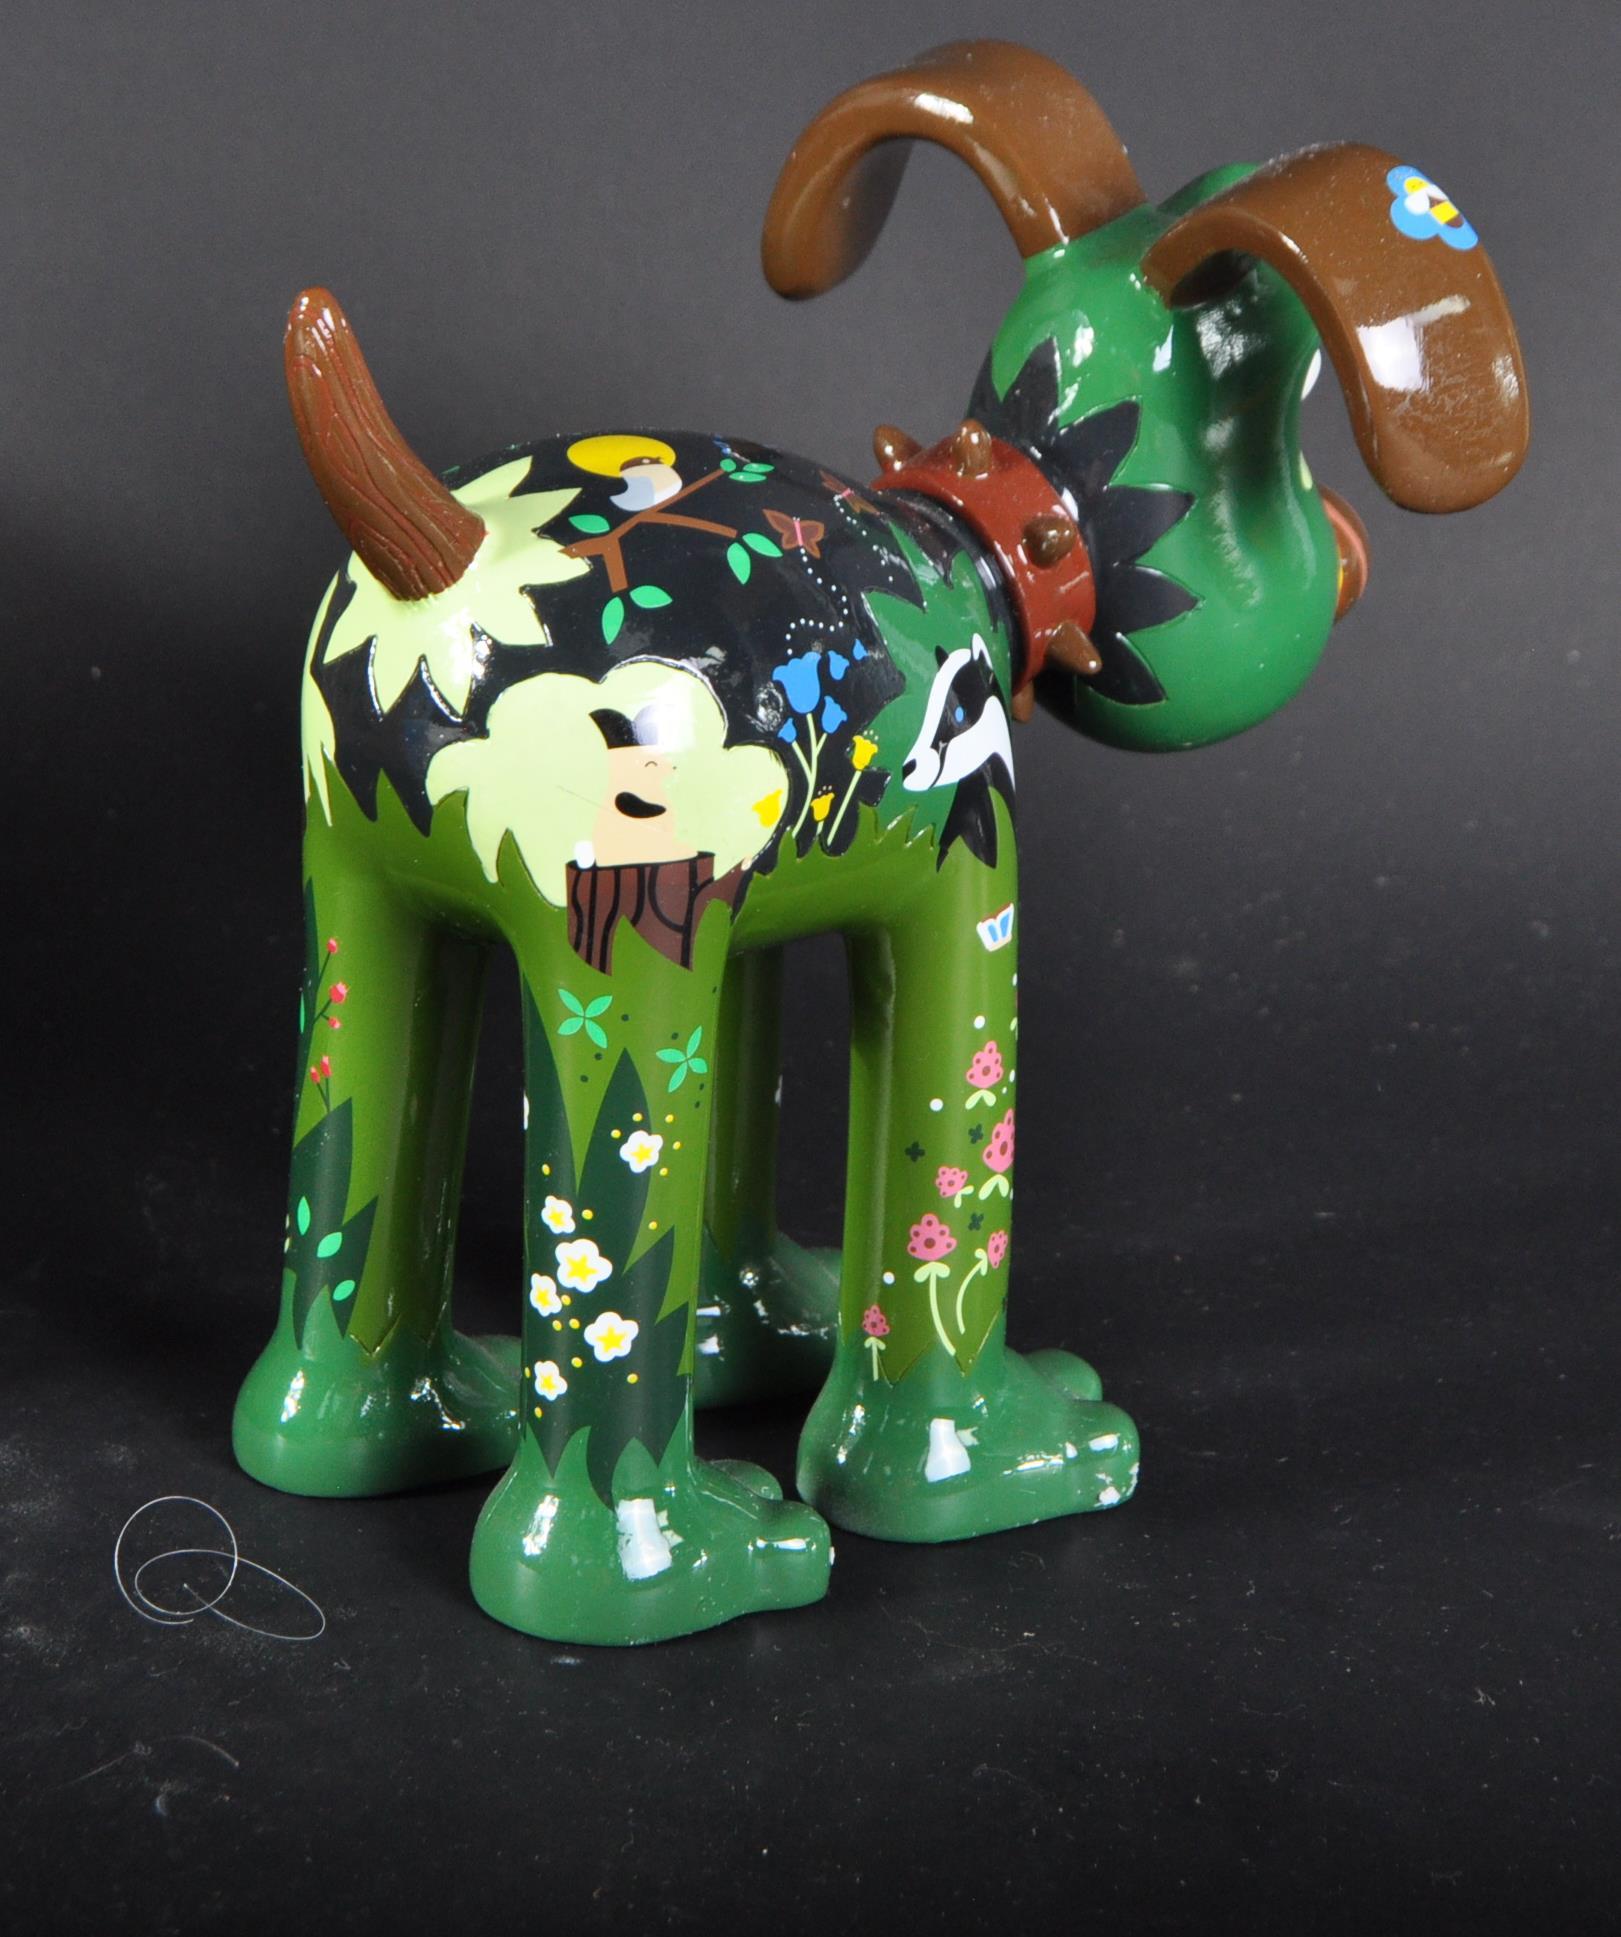 WALLACE & GROMIT - GROMIT UNLEASHED COLLECTABLE FIGURINE - Image 4 of 5